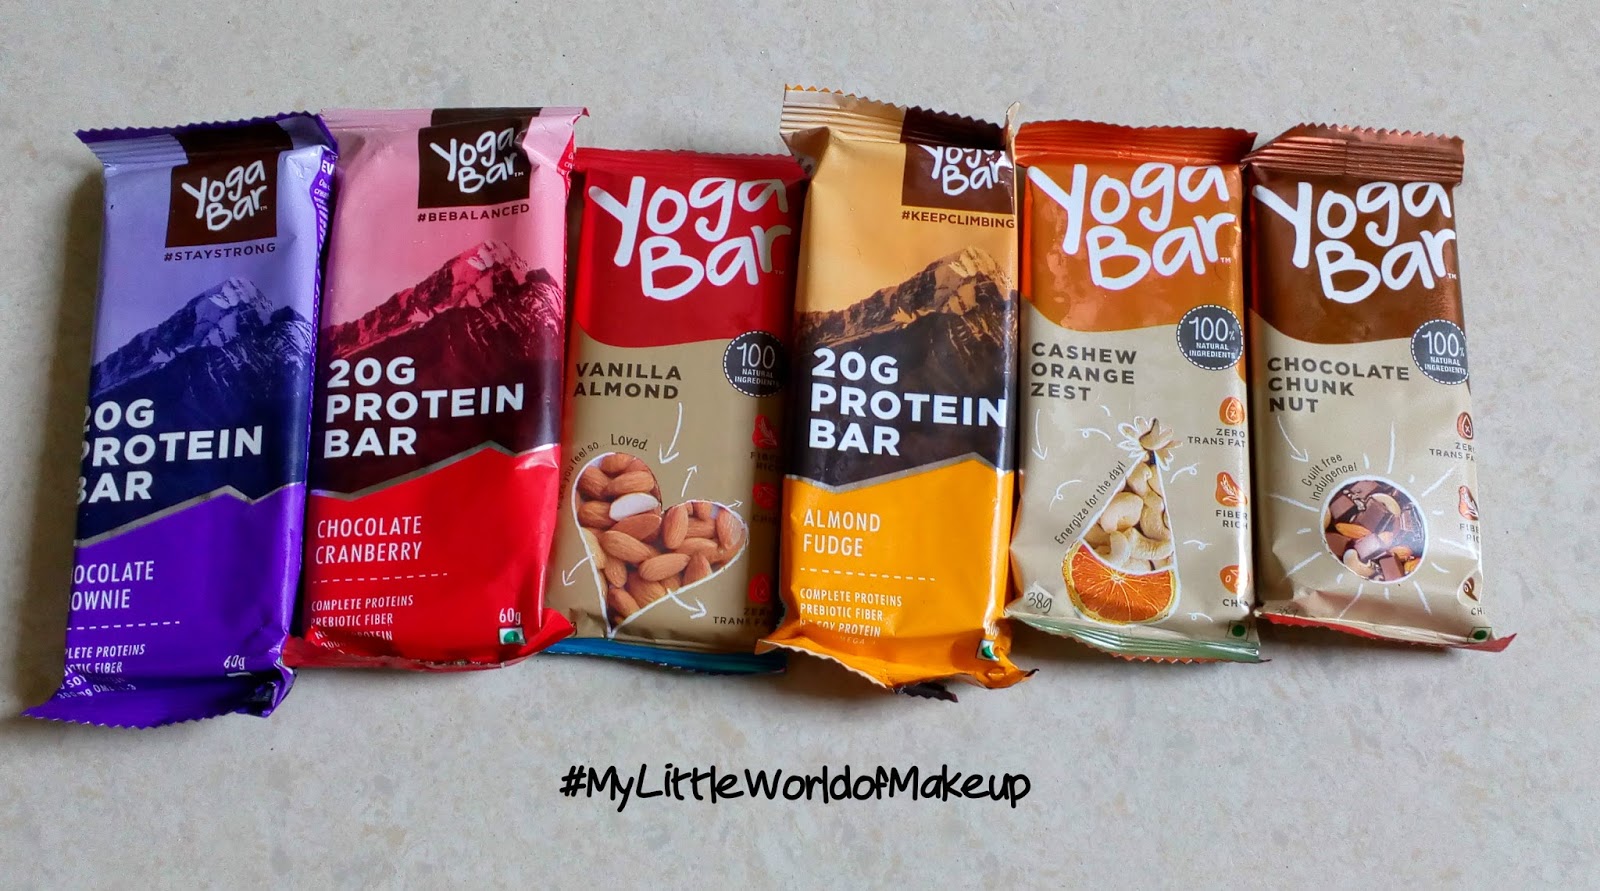 Yoga Bar - Energy Protein & Snack Bars for those unexpected hunger pangs!